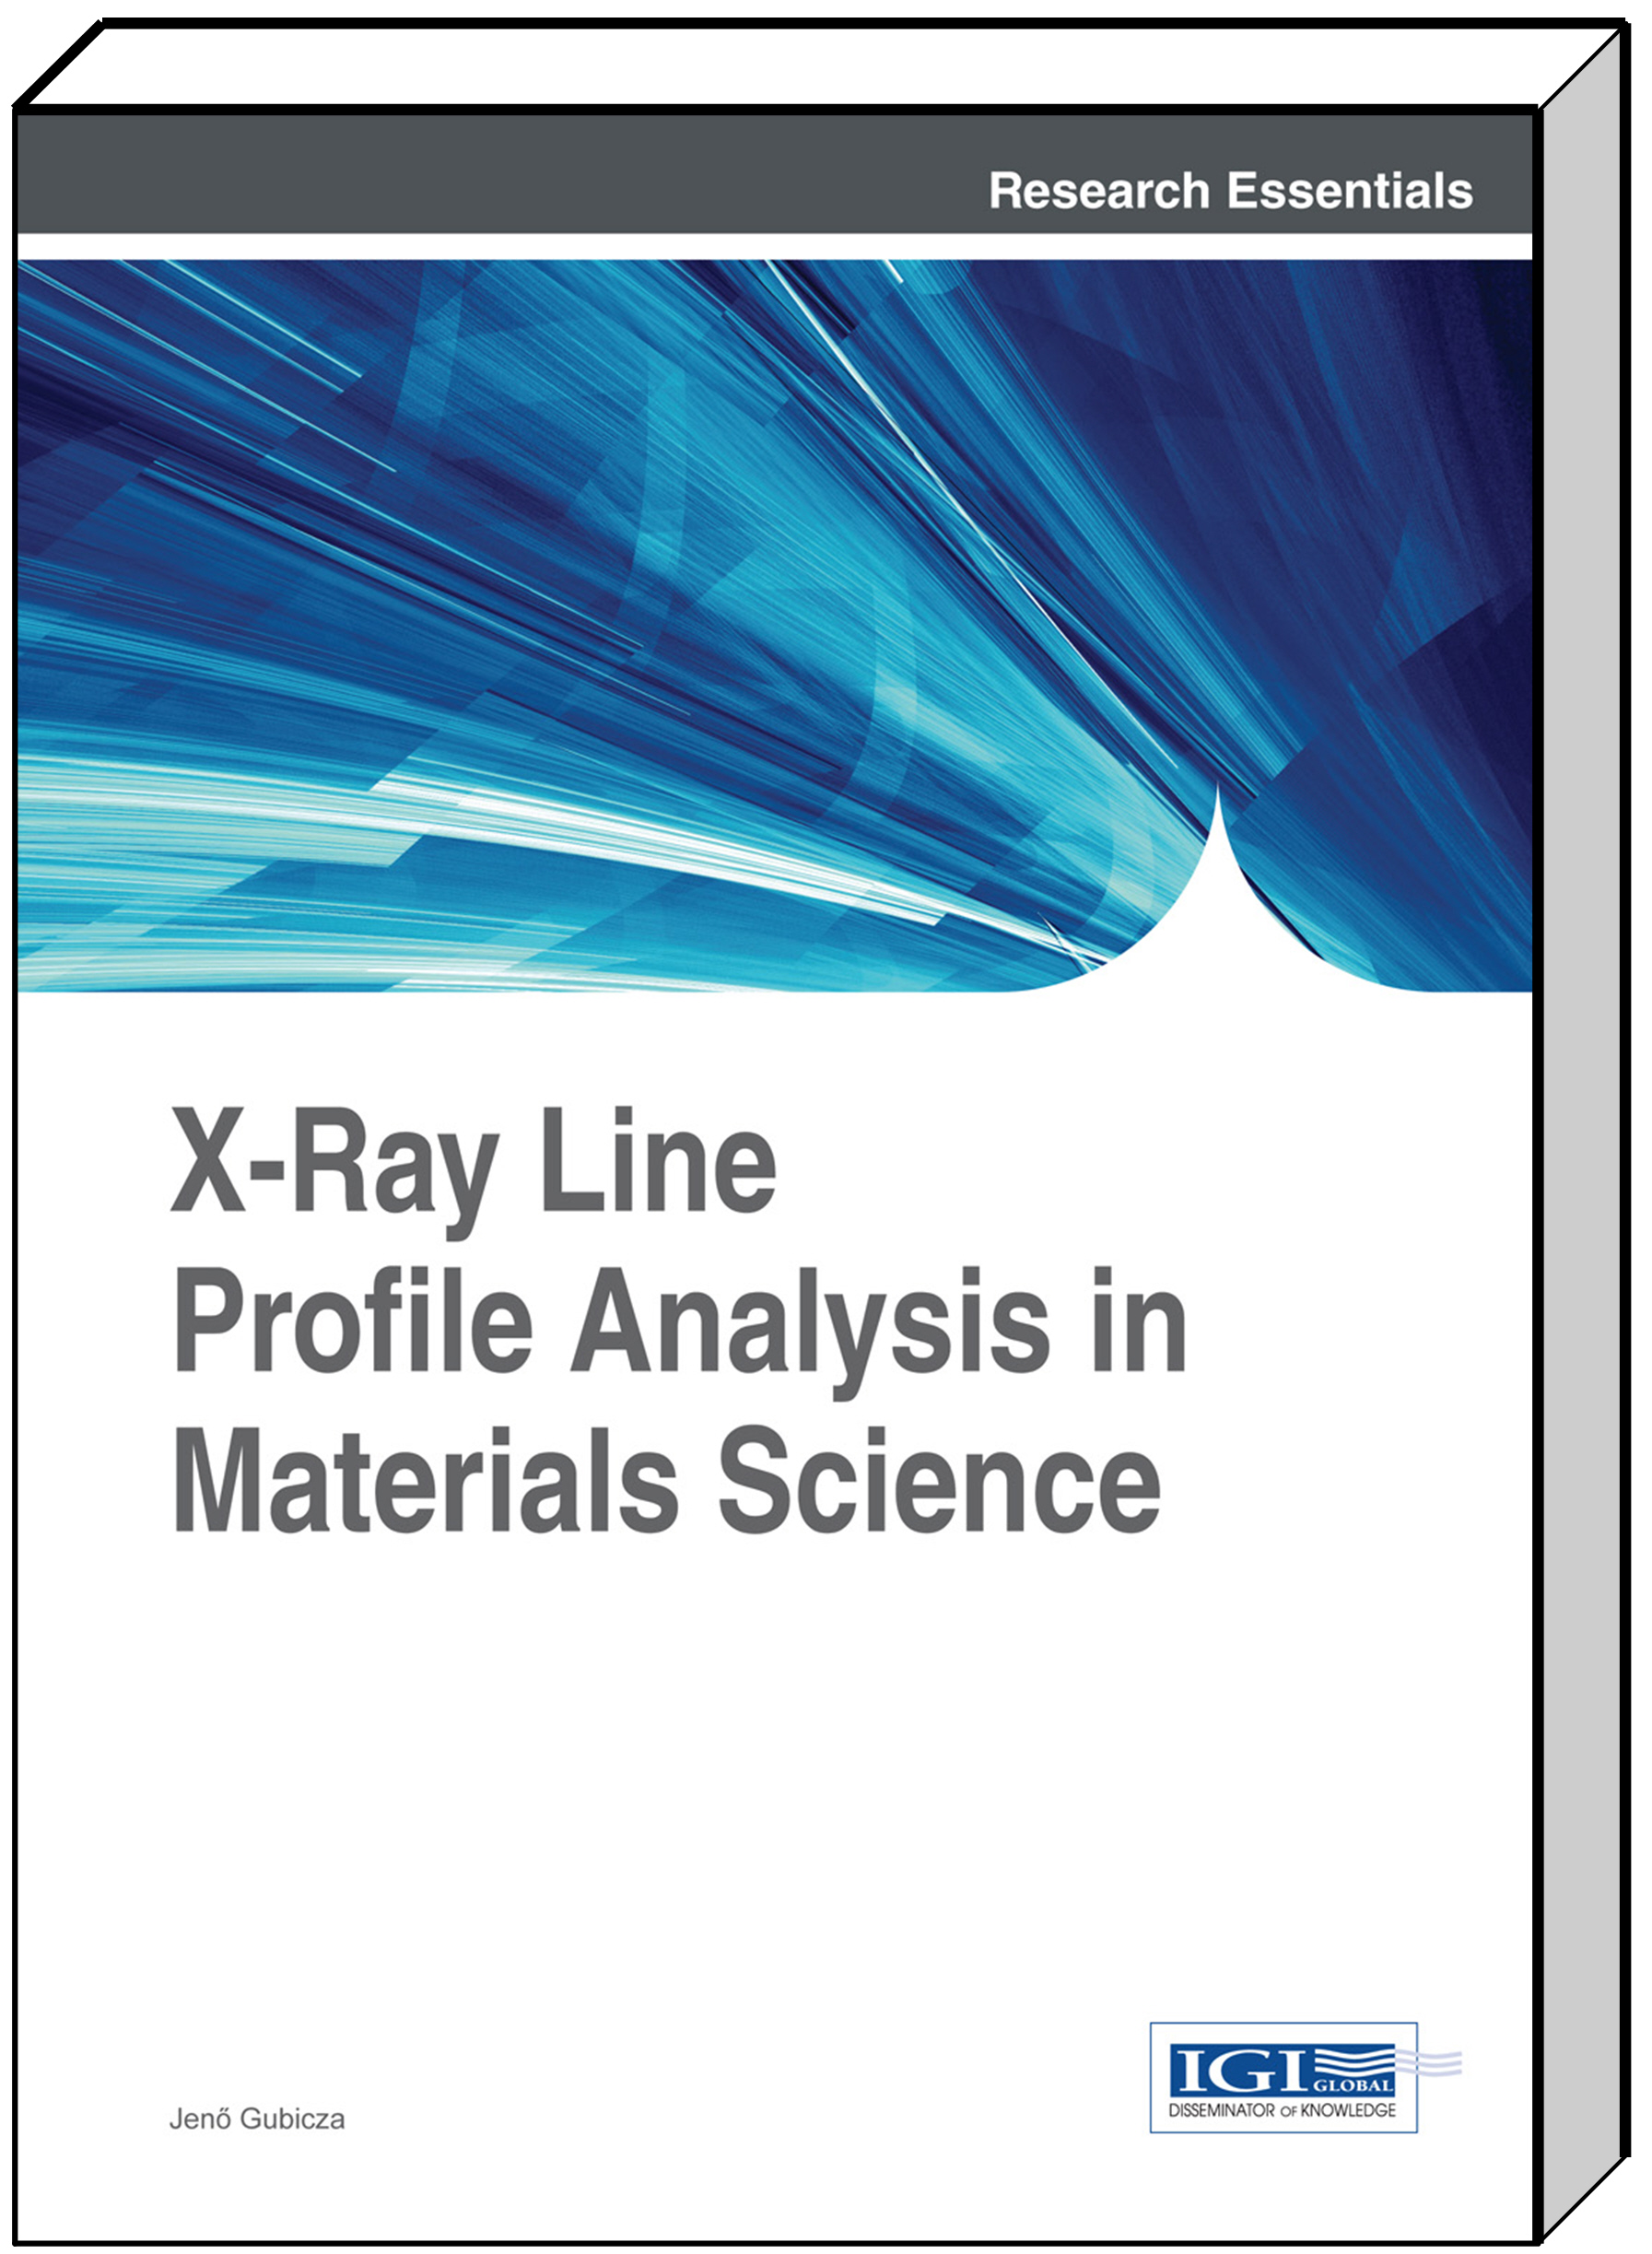 X-ray-line-profile-analysis-in-mater-sci